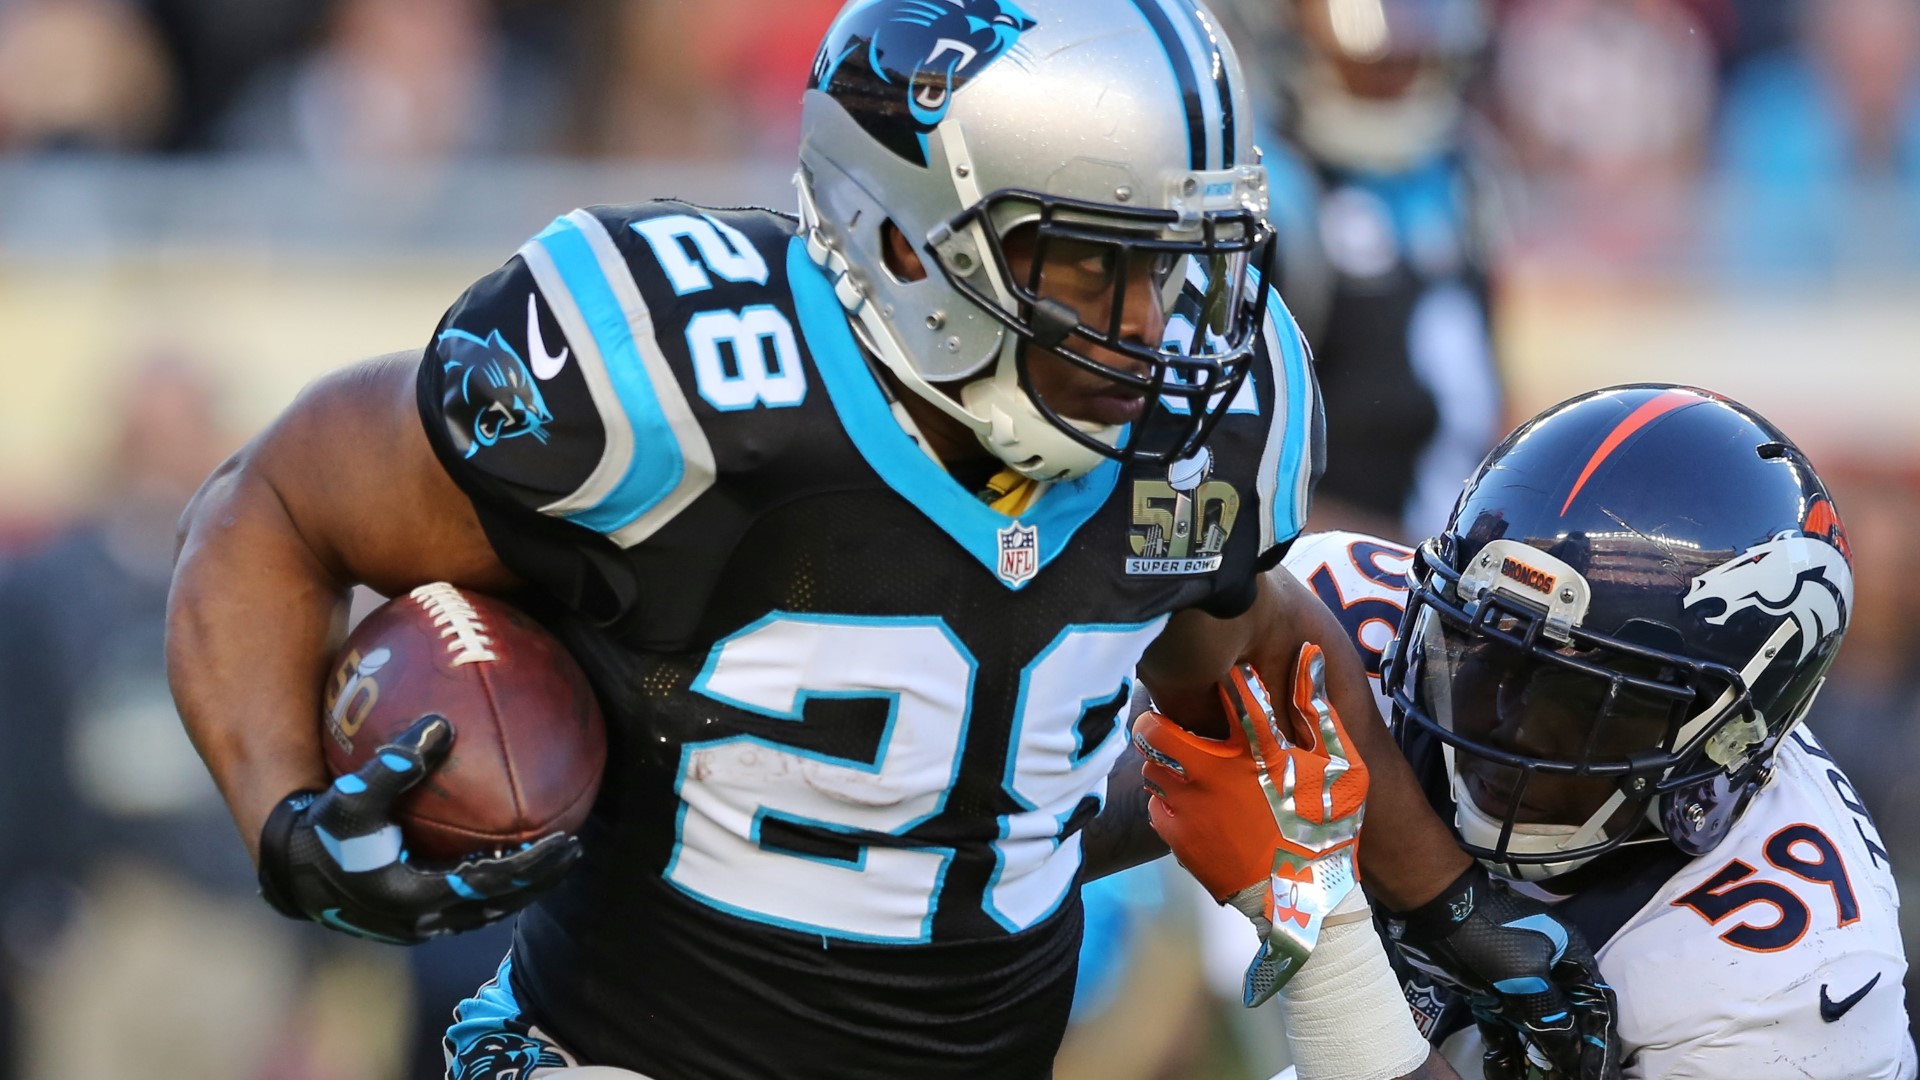 Former Carolina Panthers star Jonathan Stewart discusses playing in a Super Bowl and gives his prediction for the big game.